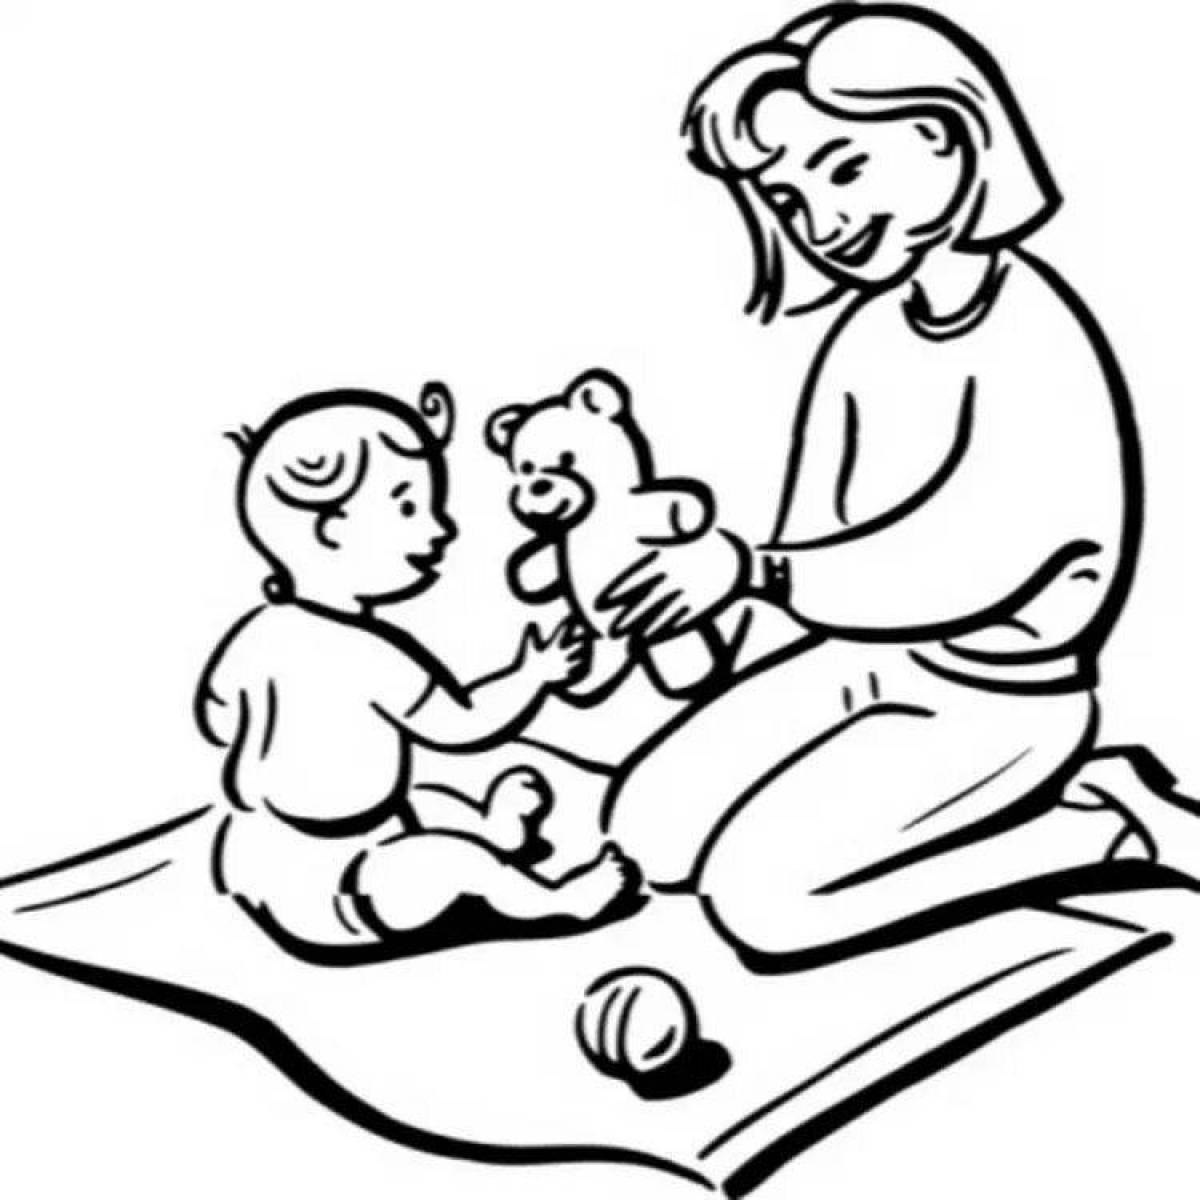 Coloring pages for mom and baby